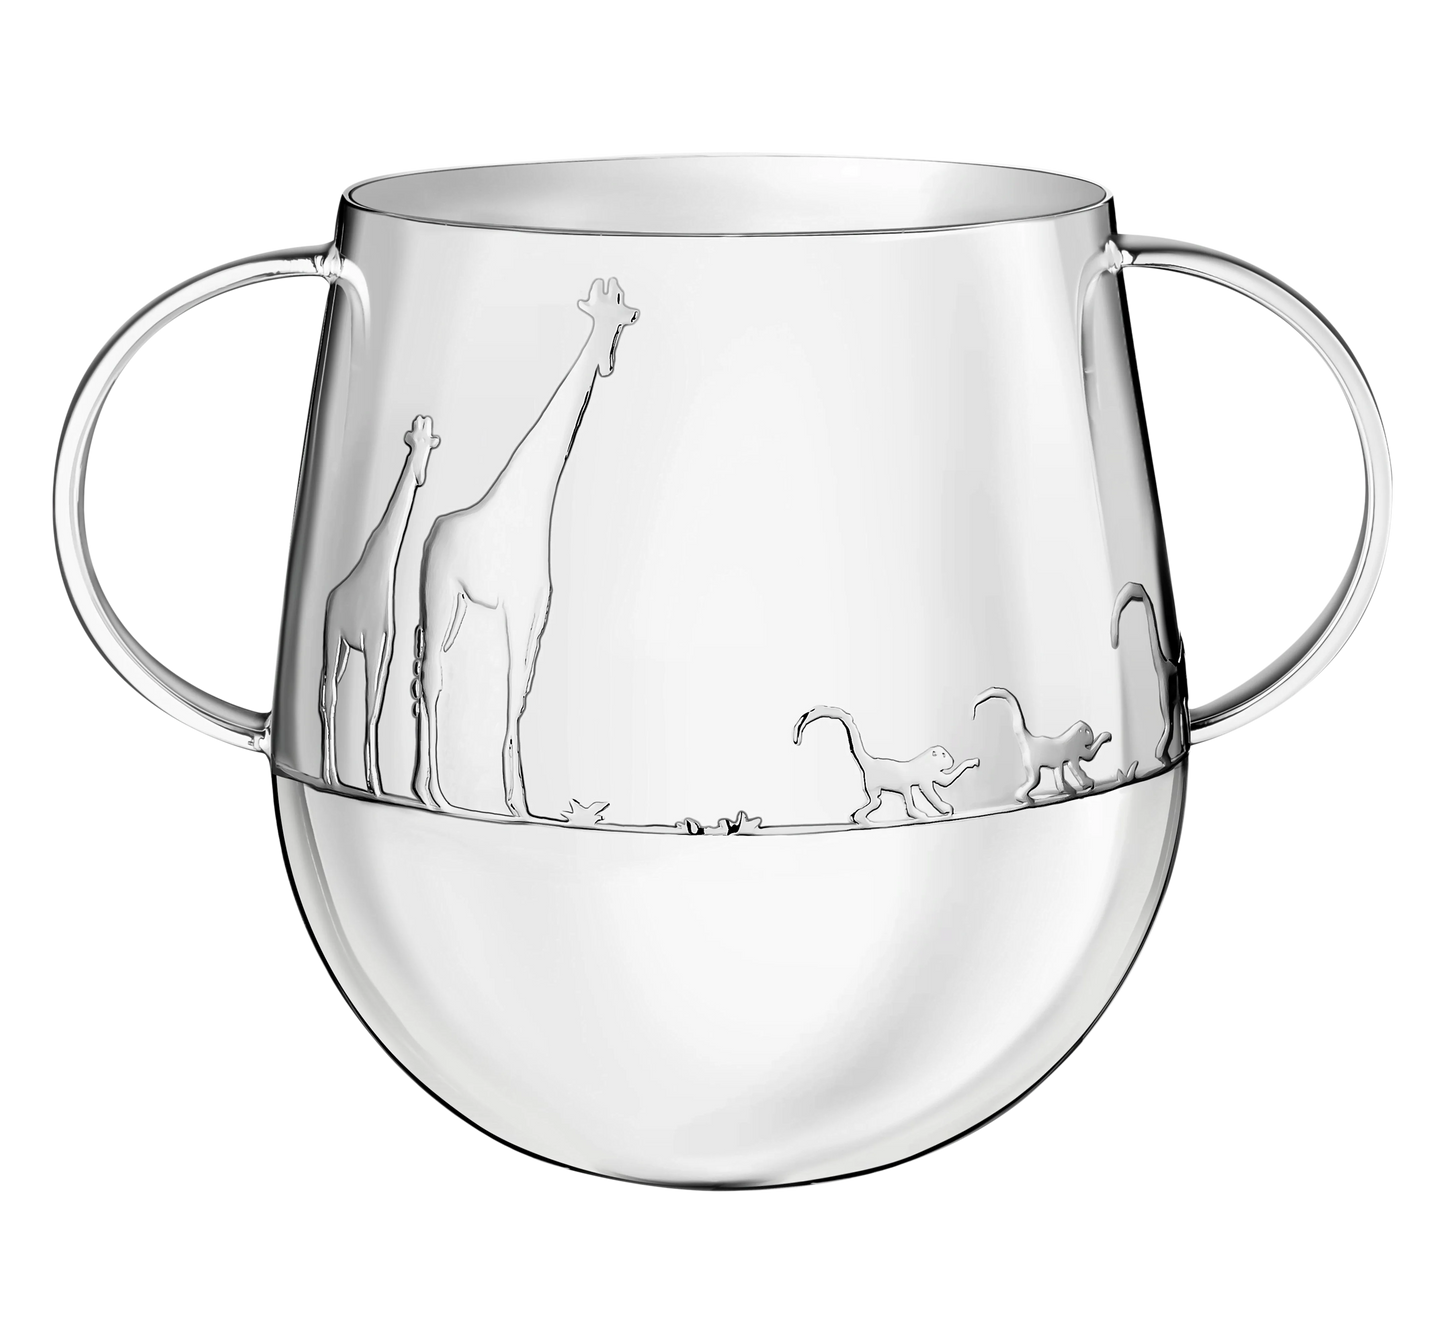 Christofle Savane Silver-Plated Baby Cup